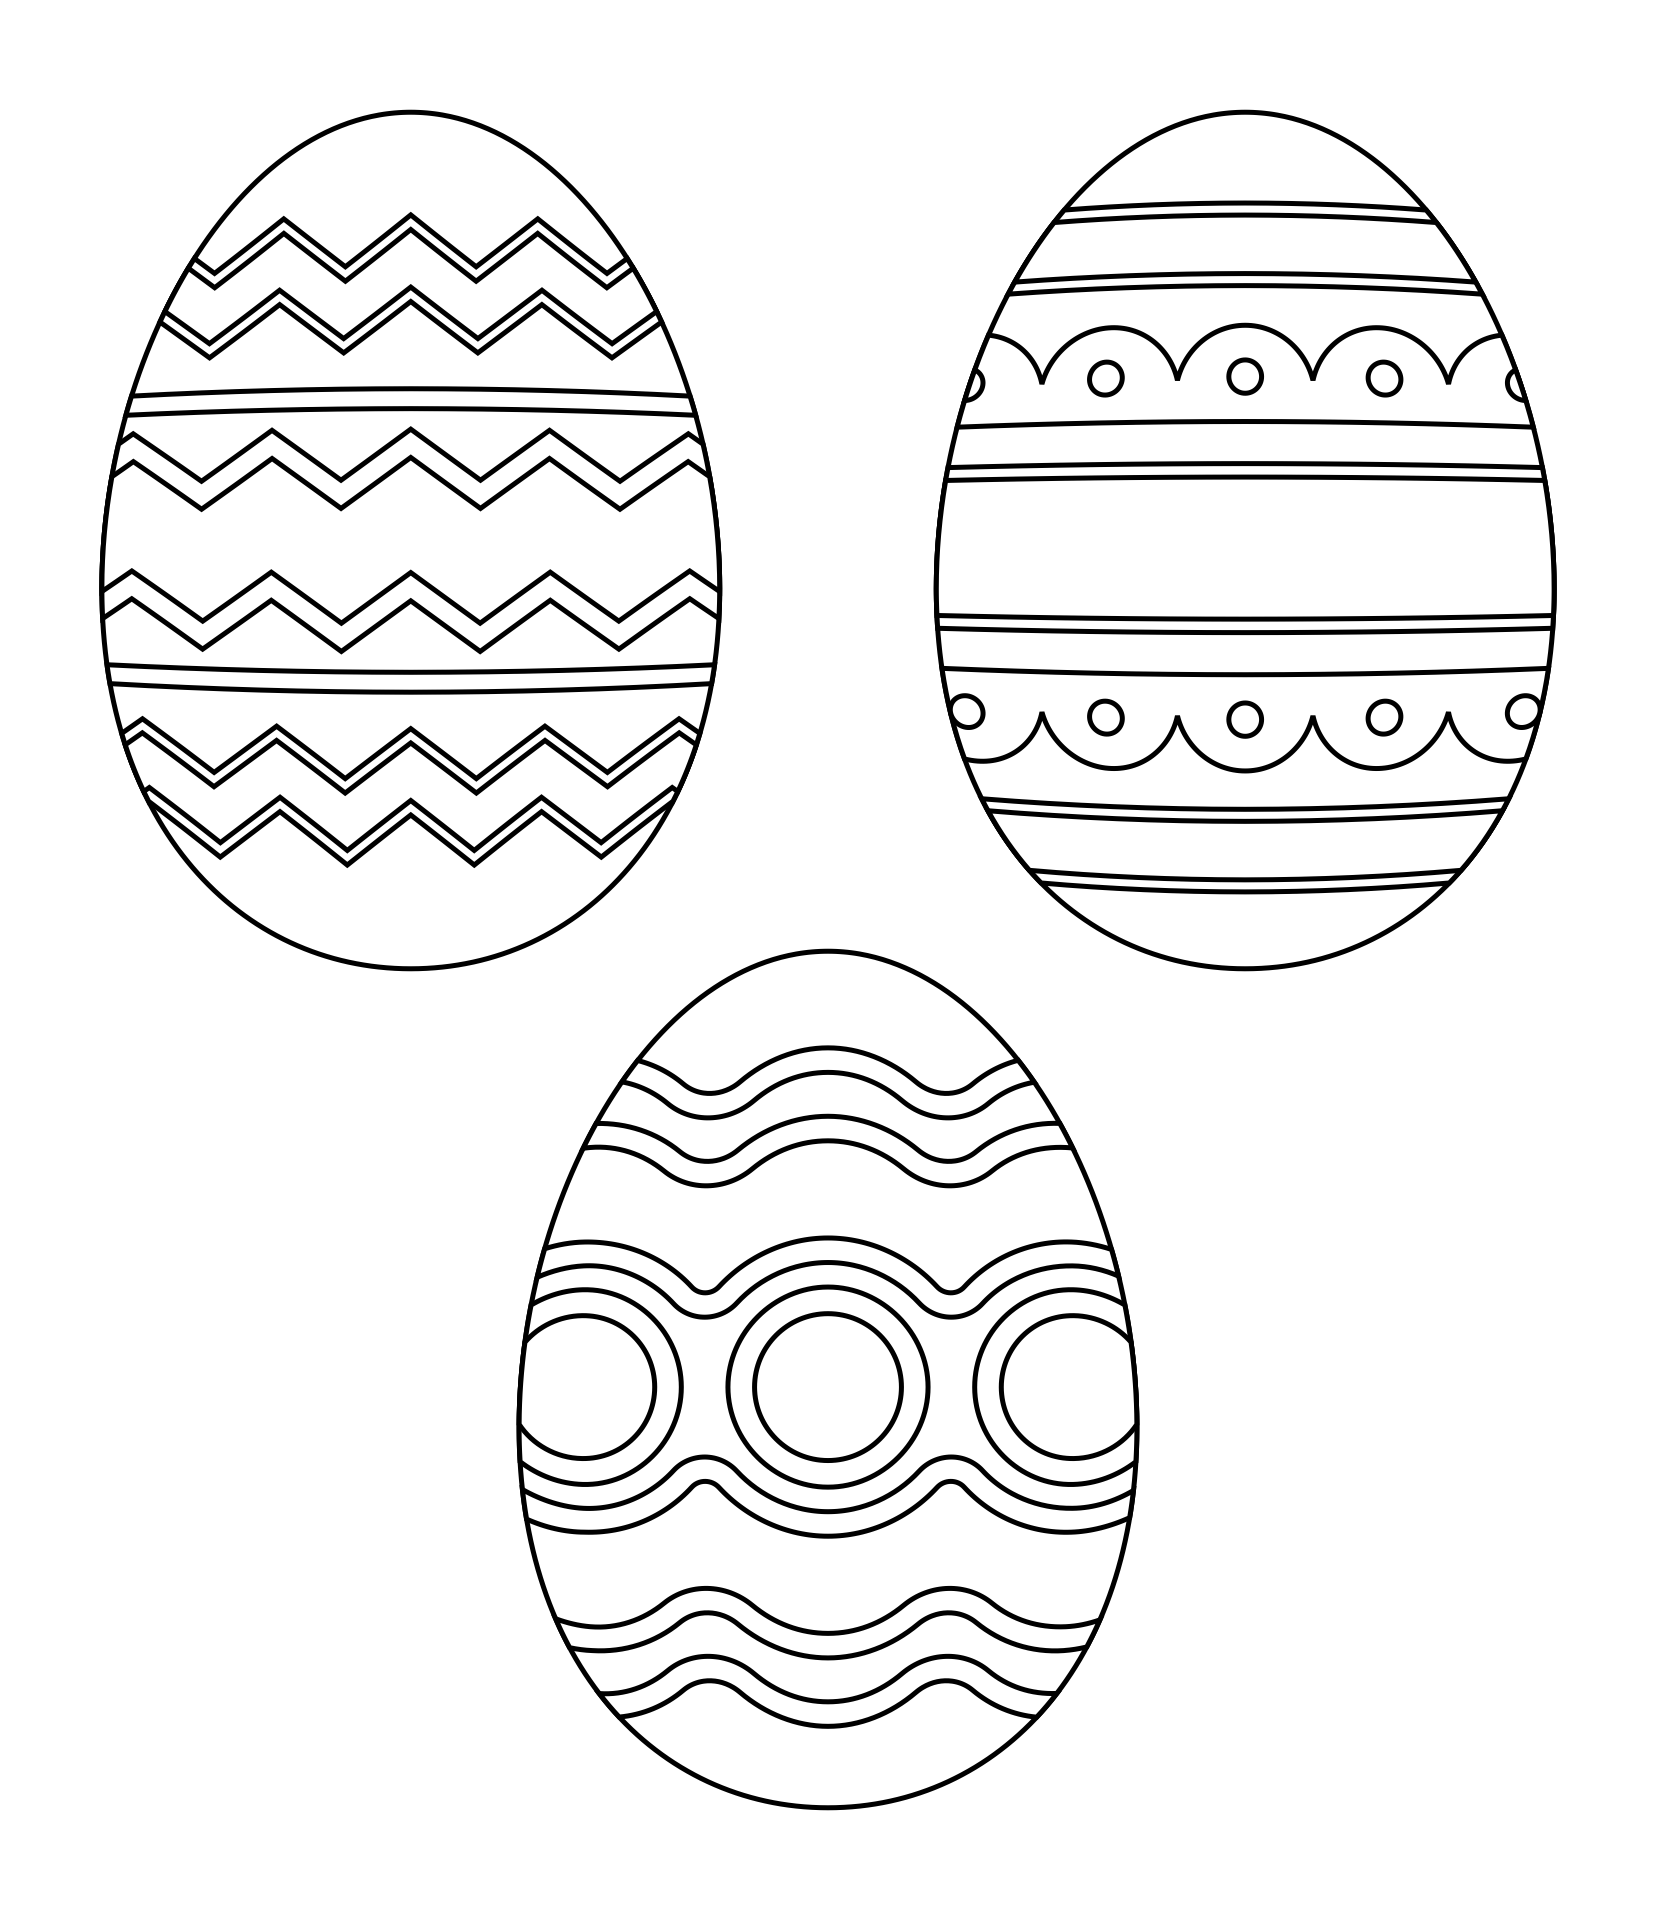 6 Best Images of Free Printable Christian Easter Crafts Christian